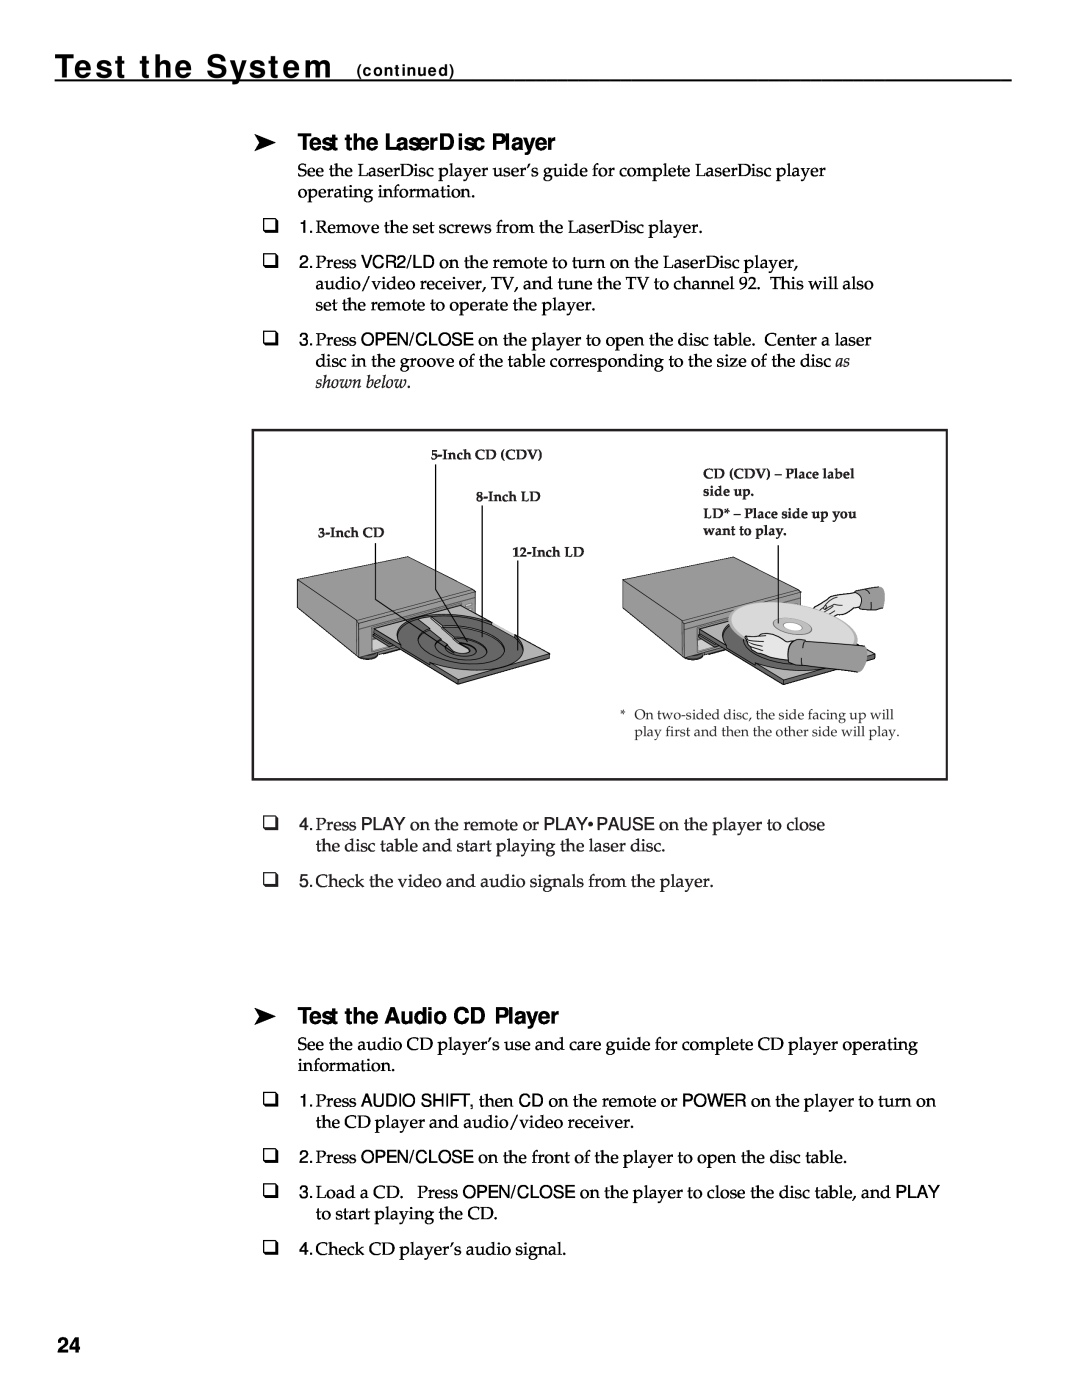 RCA HT35752BD manual Test the LaserDisc Player, Test the Audio CD Player, Test the System continued 